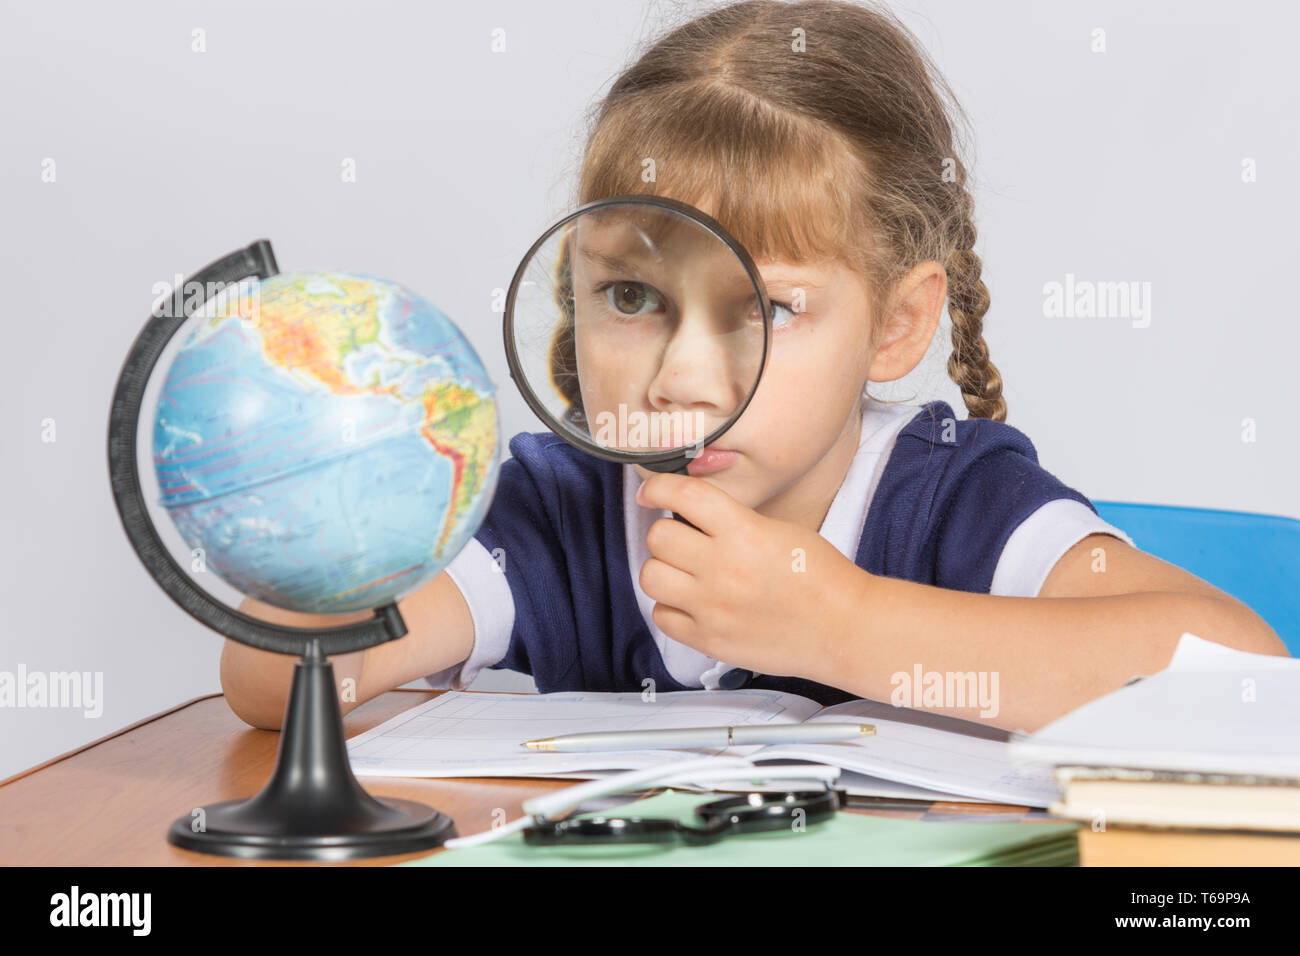 Schoolgirl looking at globe through a magnifying glass Stock Photo